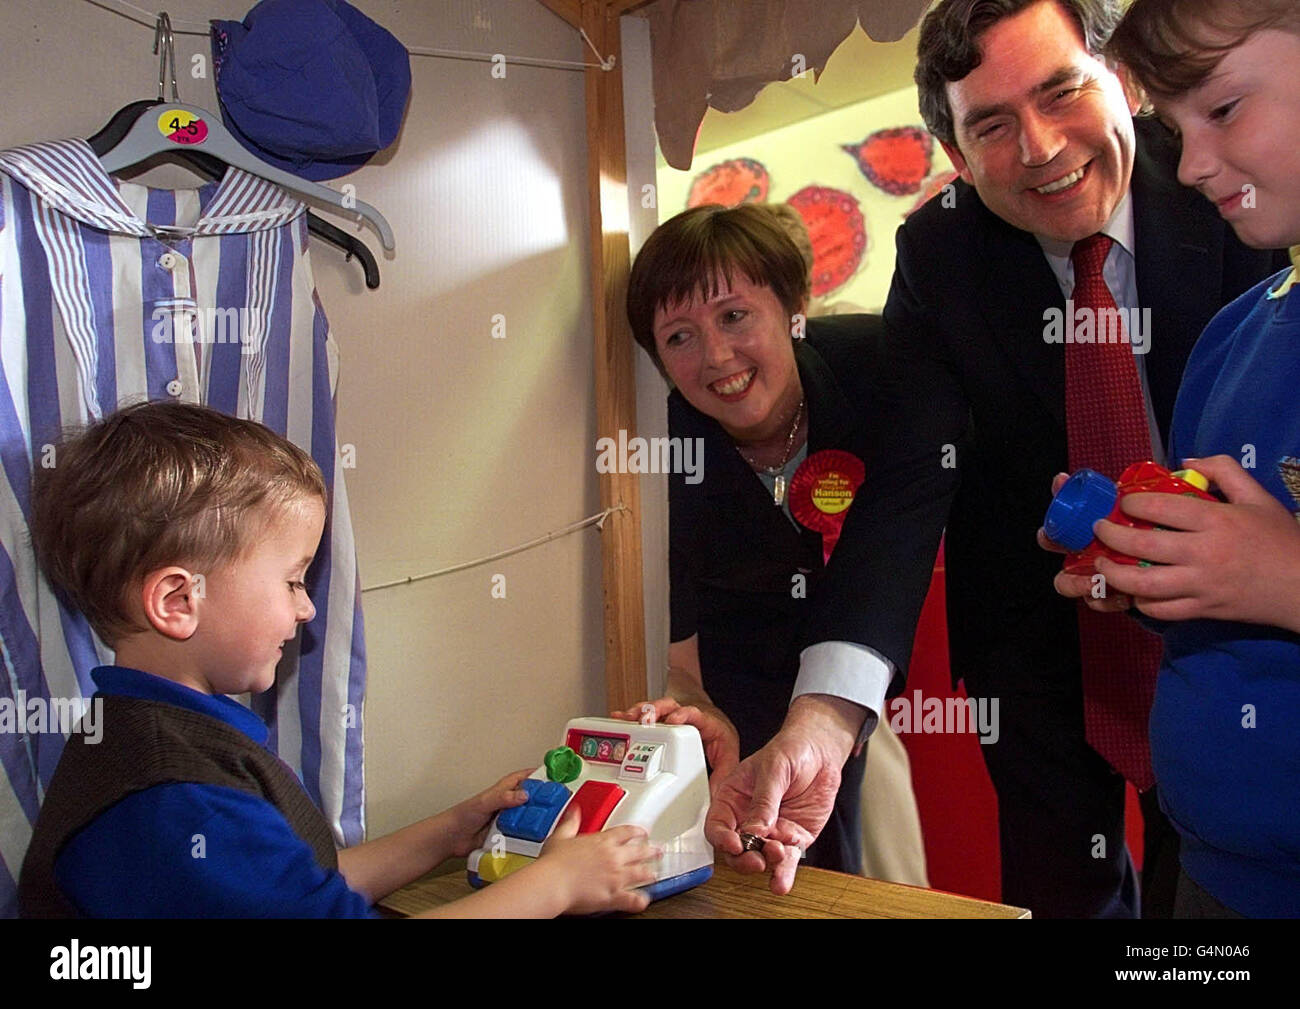 Labour Chancellor Gordon Brown plays 'shop' at Leaf Lane infant school in Winsford, Cheshire. Pictured with the Chancellor is Margaret Hanson, Labour candidate in the forth coming Eddisbury by-election. Stock Photo